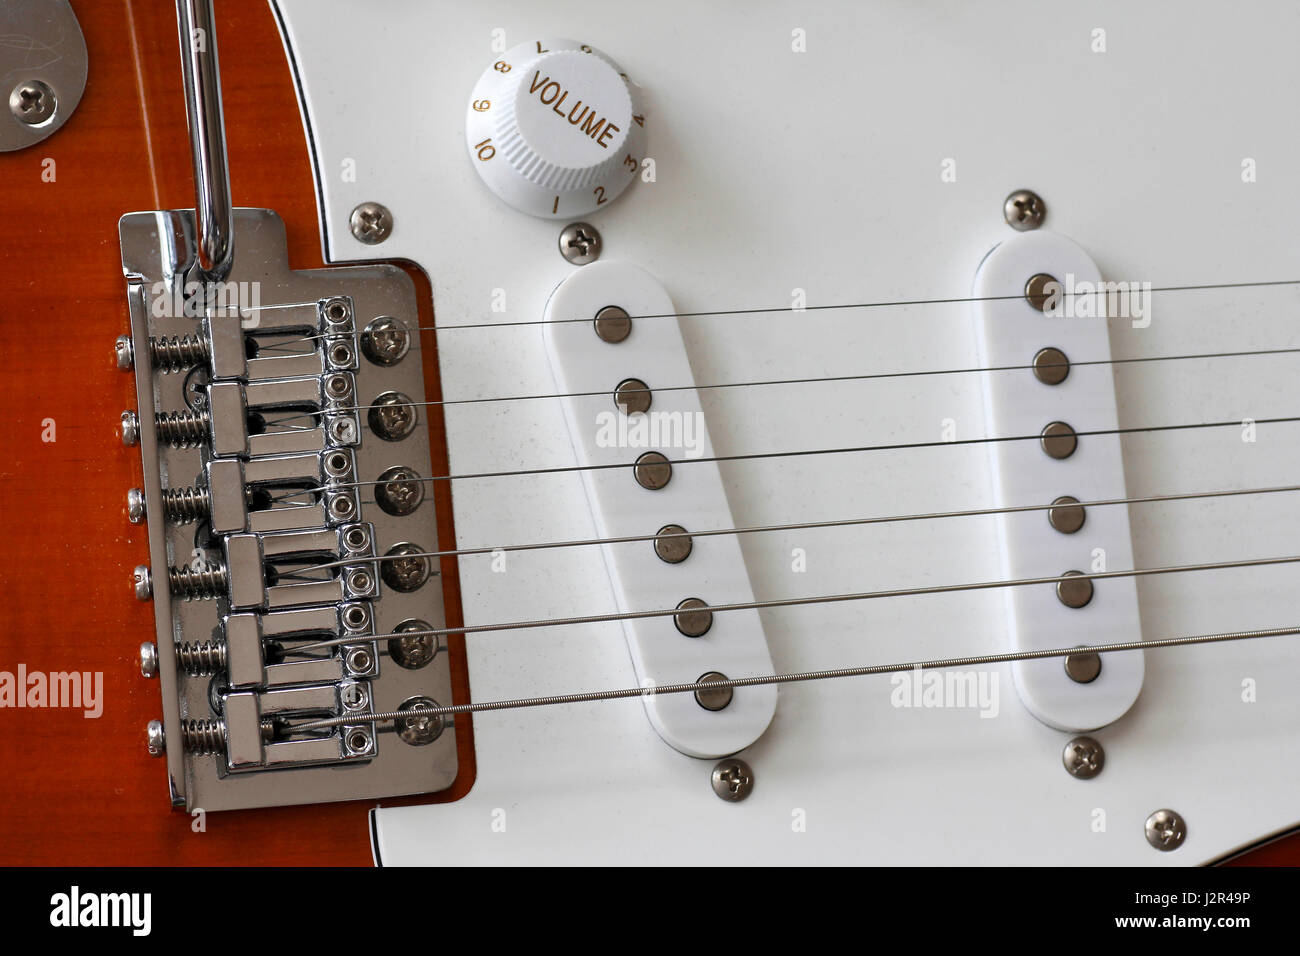 Macro of electric guitar strings and single pickup and pickguards Stock Photo